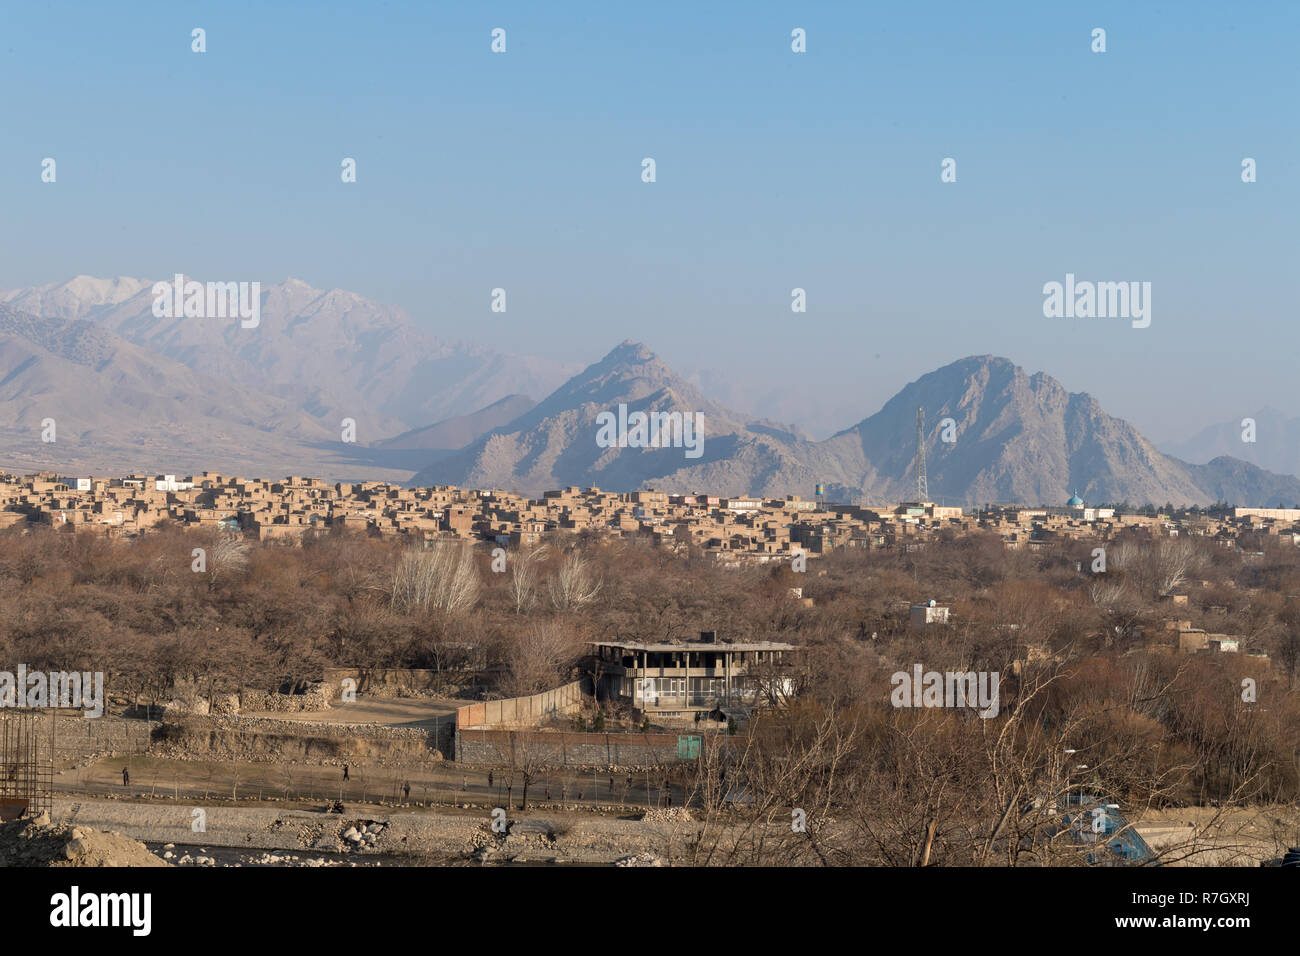 View of the City of Parvan at the Entrance of Panjshir Valley, Panjshir Province, Afghanistan Stock Photo